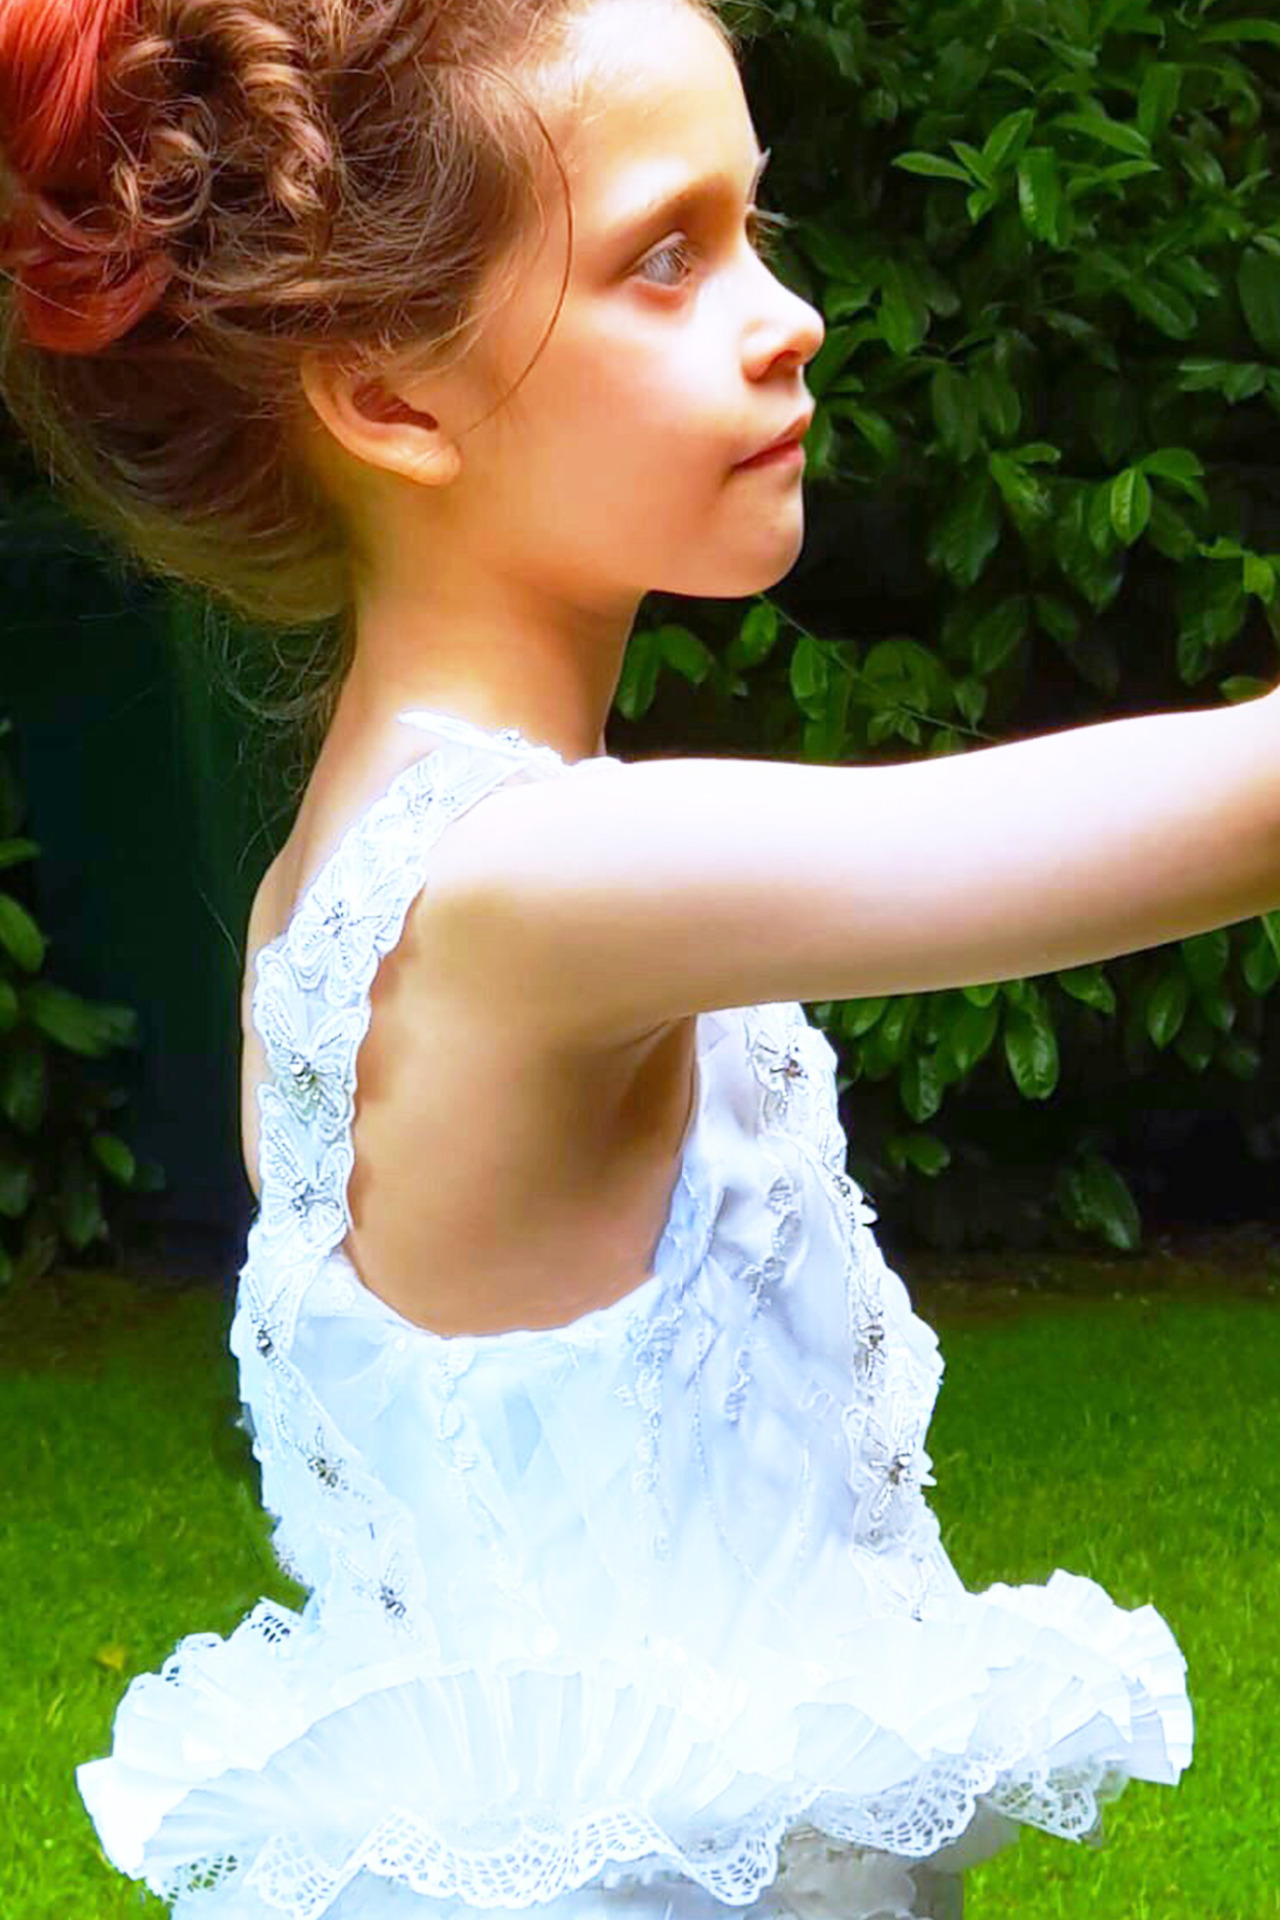 White Azalea Couture Dress by Miashan - Beautiful hand crafted high fashion for girls